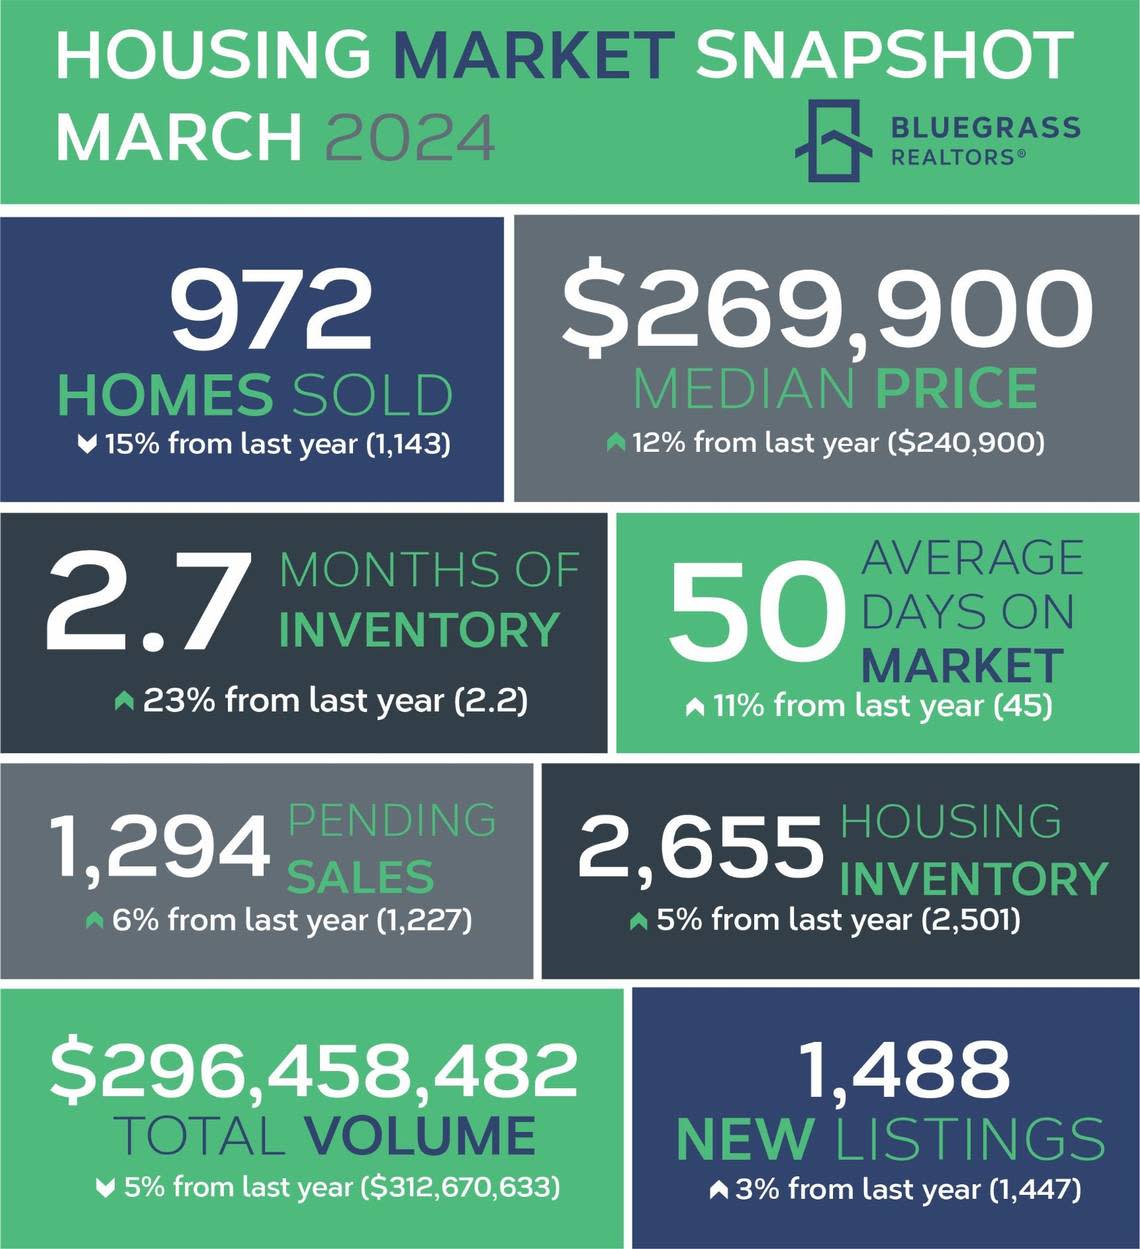 The graphic shows a snapshot of Central Kentucky’s housing market as of March 2024.